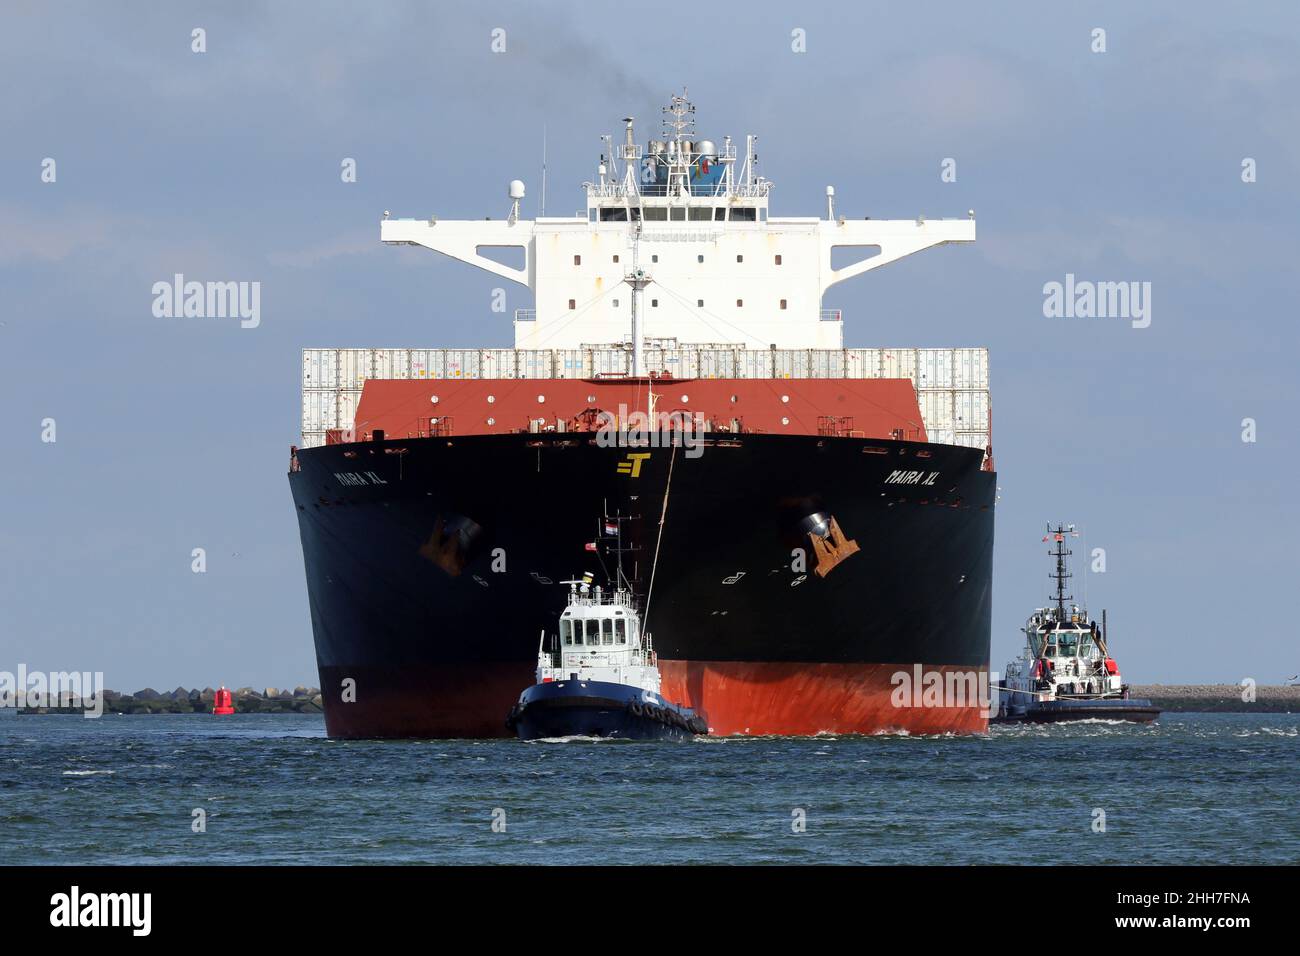 The container ship Maira XL will reach the port of Rotterdam on August 24, 2021. Stock Photo